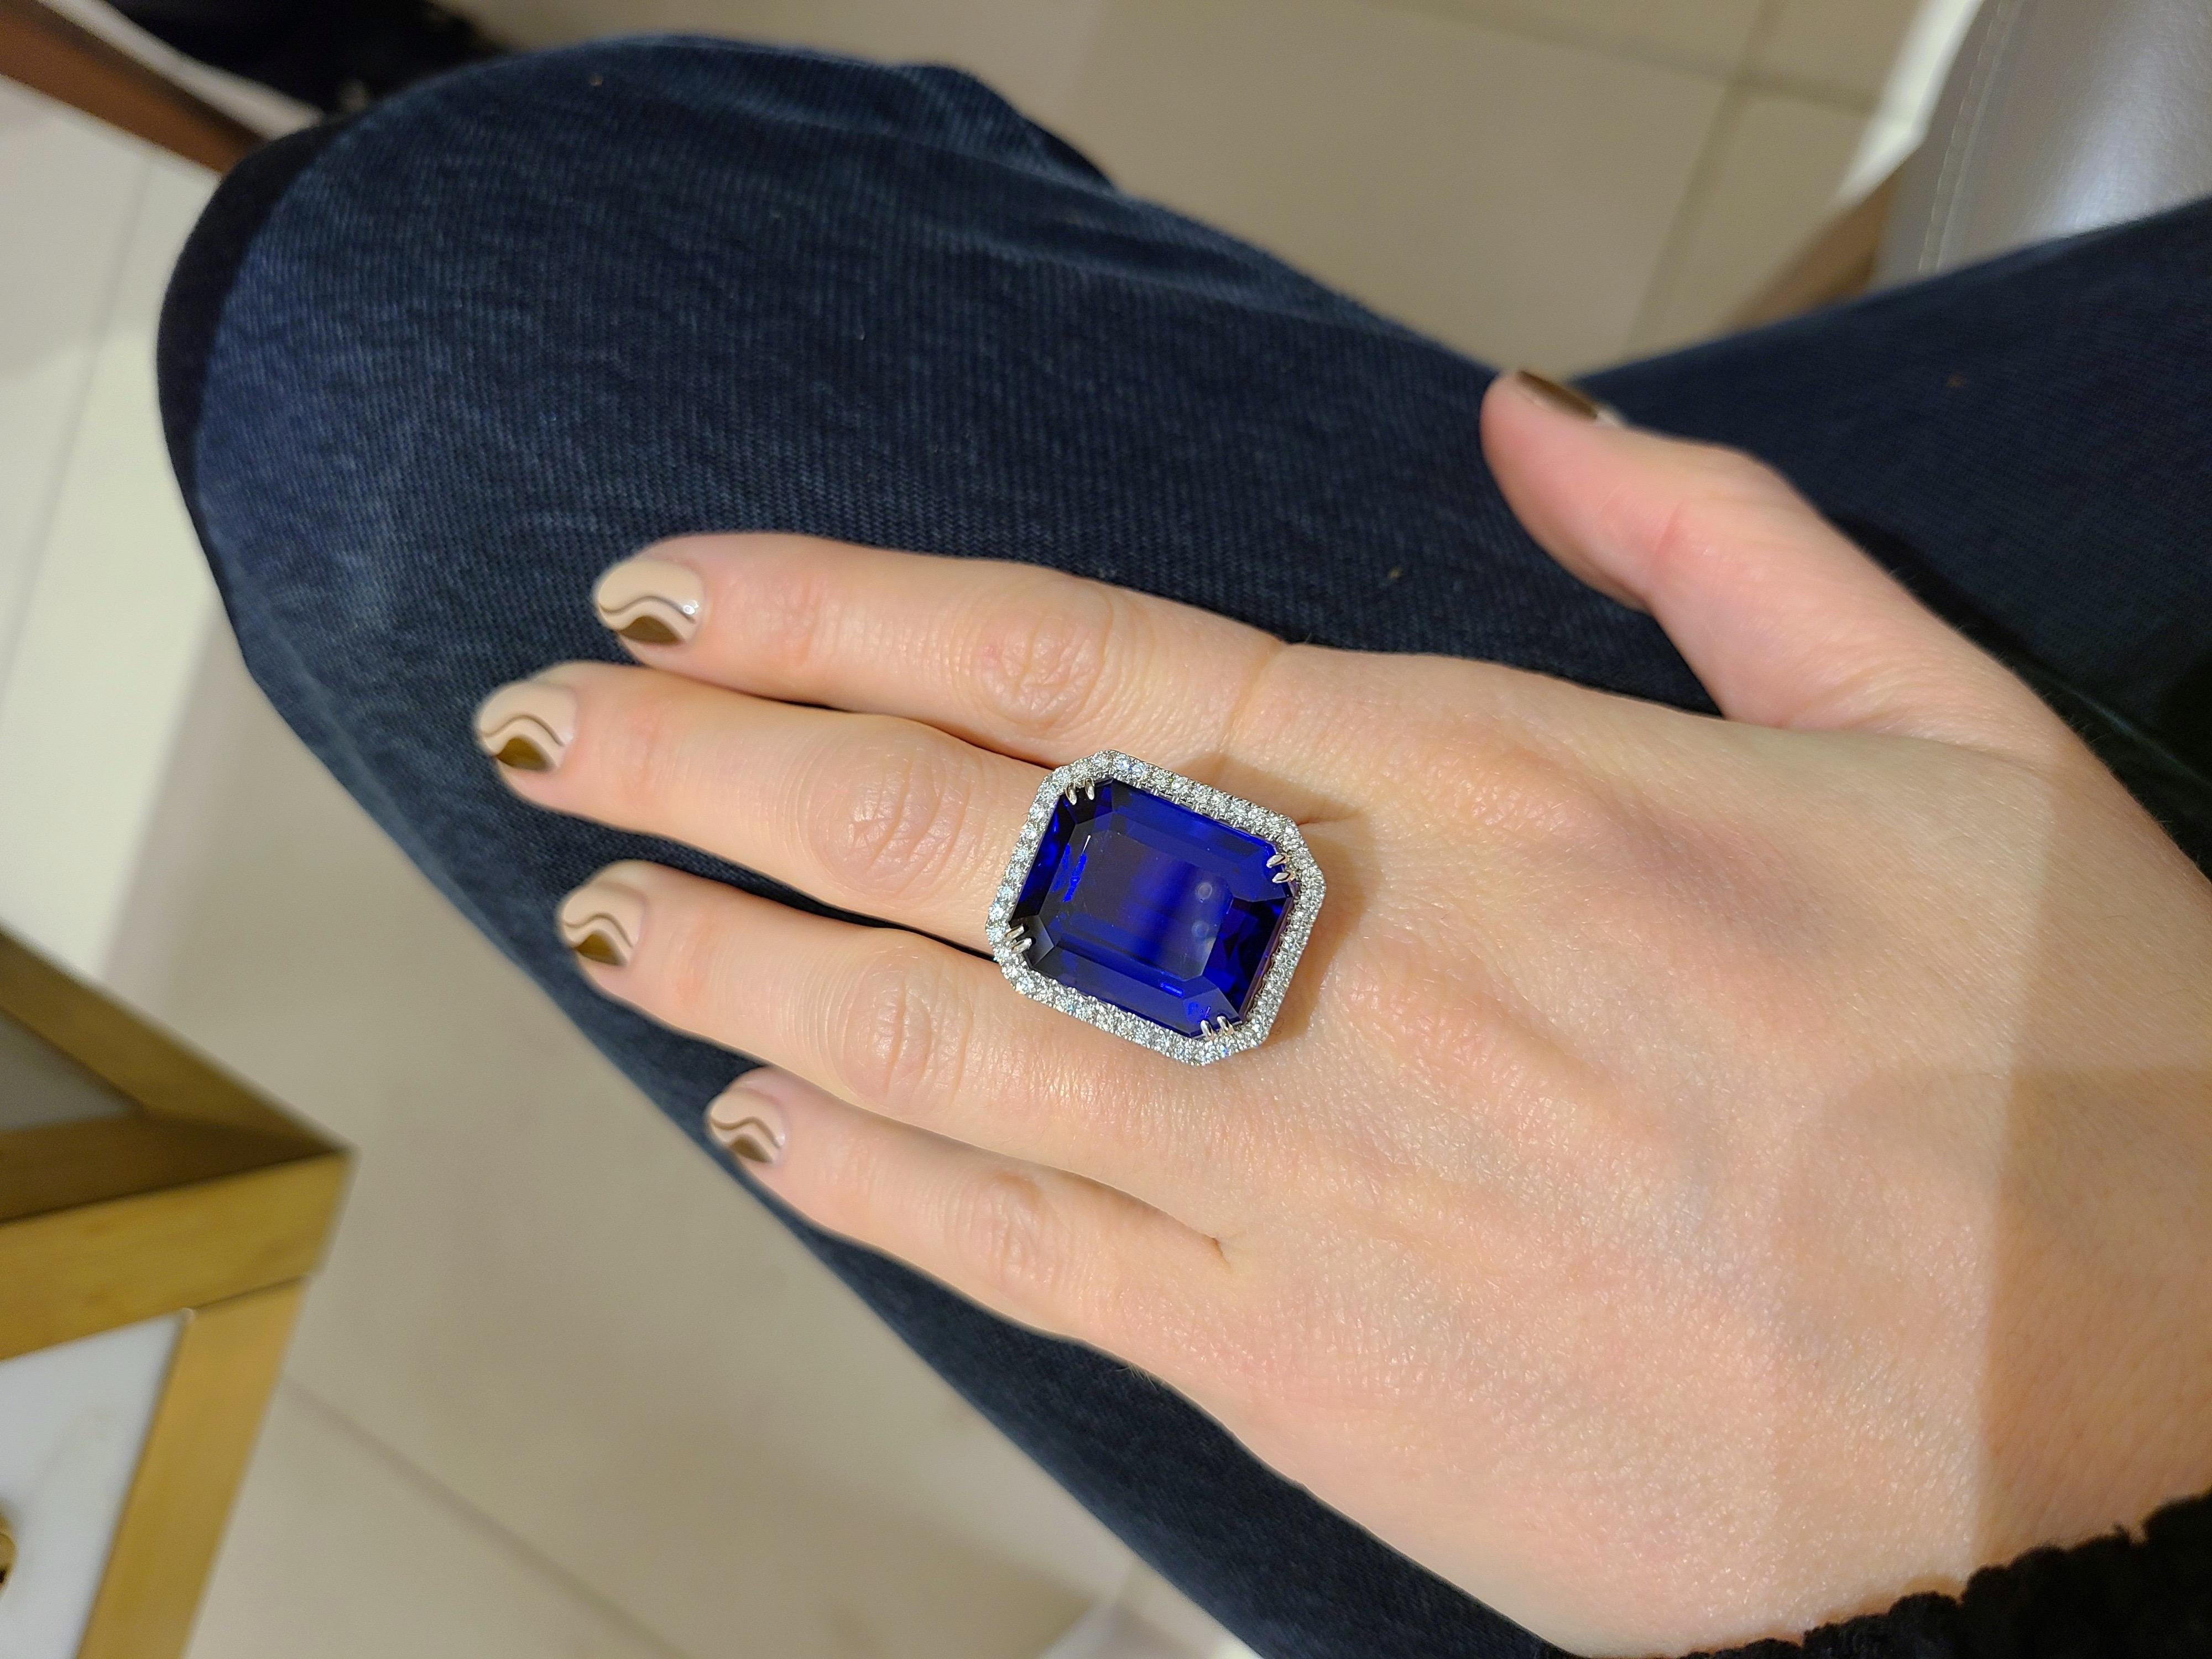 Contemporary Cellini Jewelers 18KT Gold, 32.27 Carat Tanzanite Ring with 1.45 Carat Diamonds For Sale